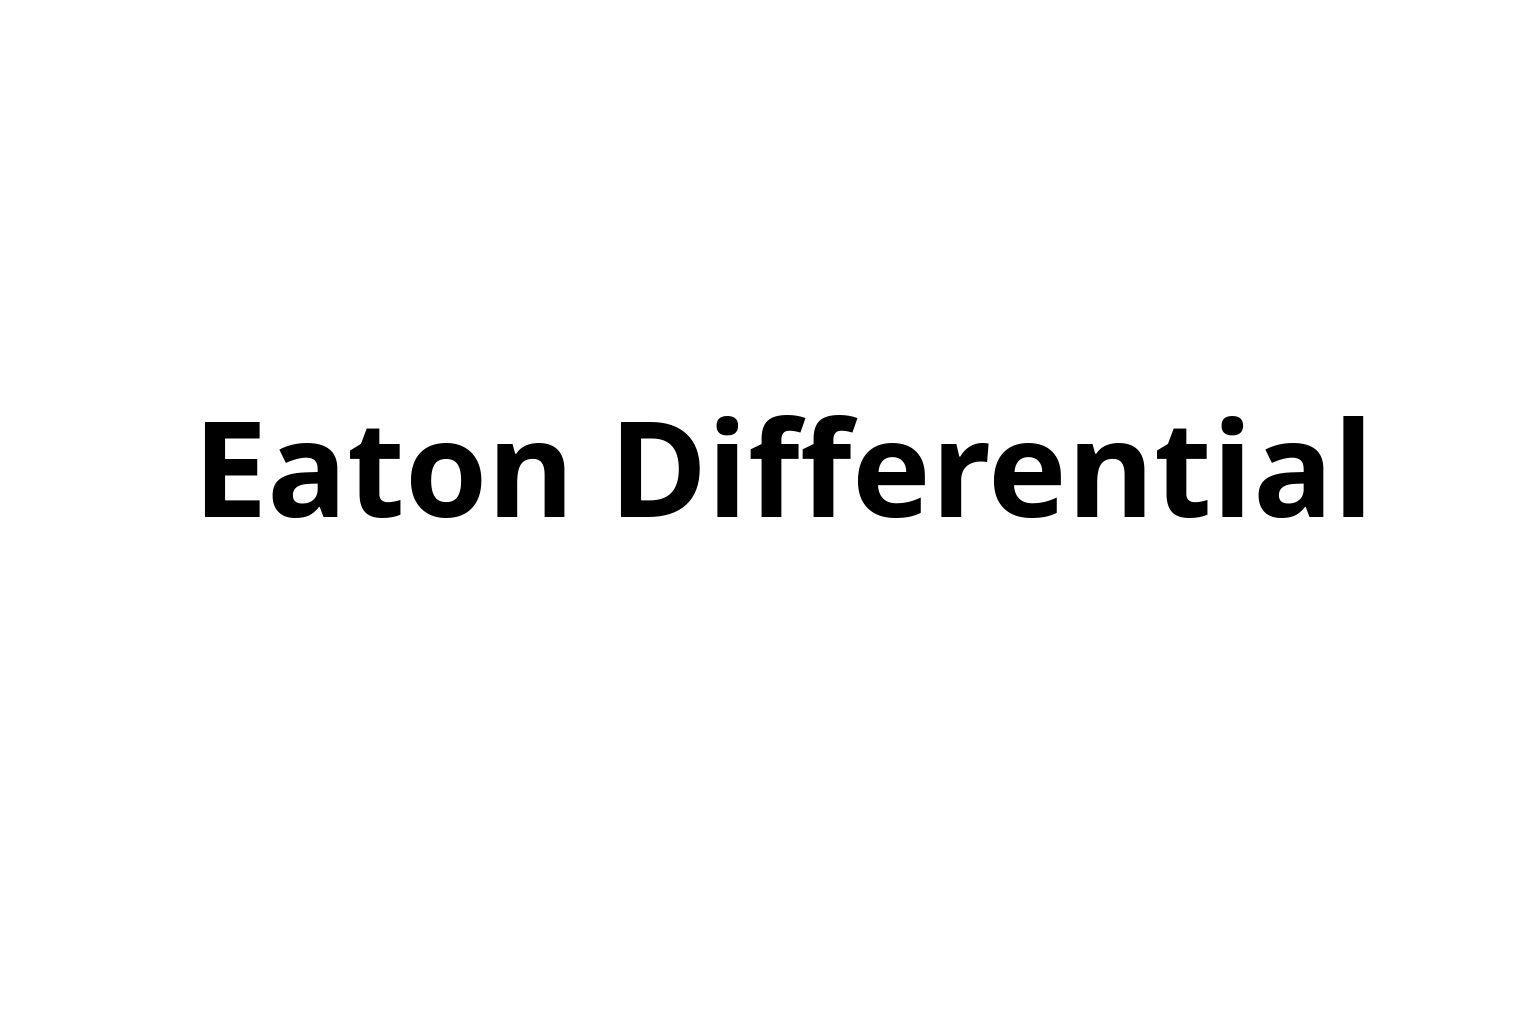 Eaton Differential